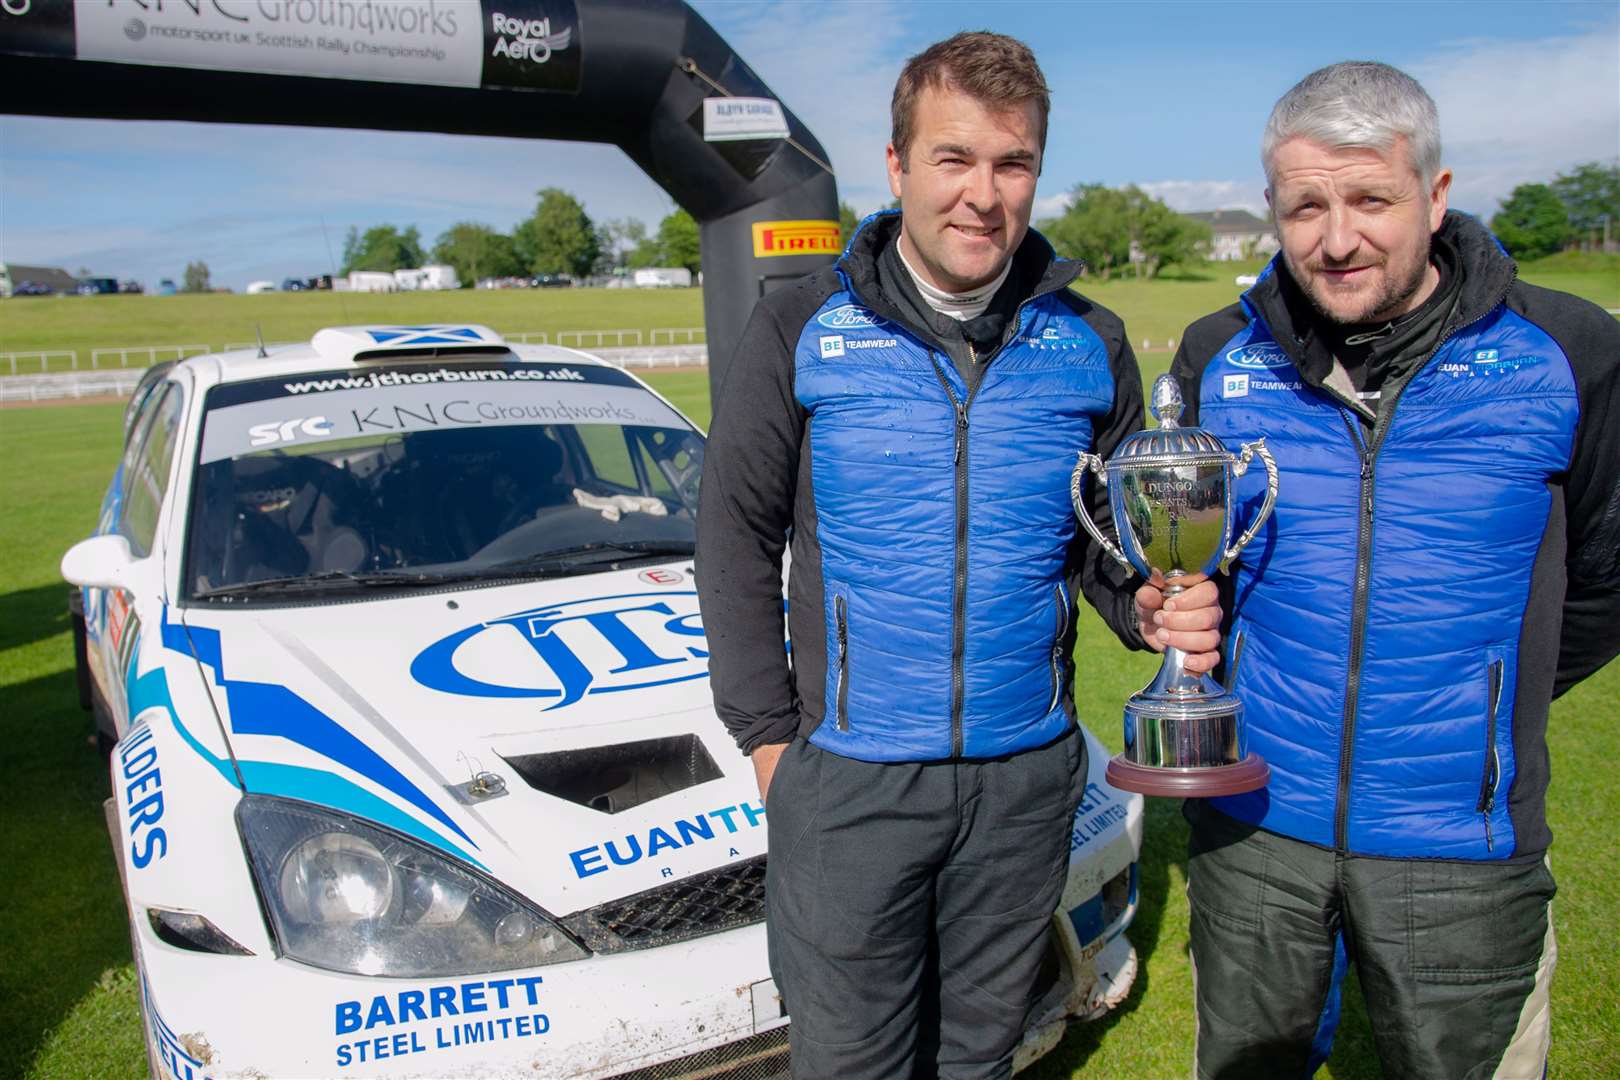 Euan Thorburn and Paul Beaton are having a dominant 2019 season. Picture: Daniel Forsyth